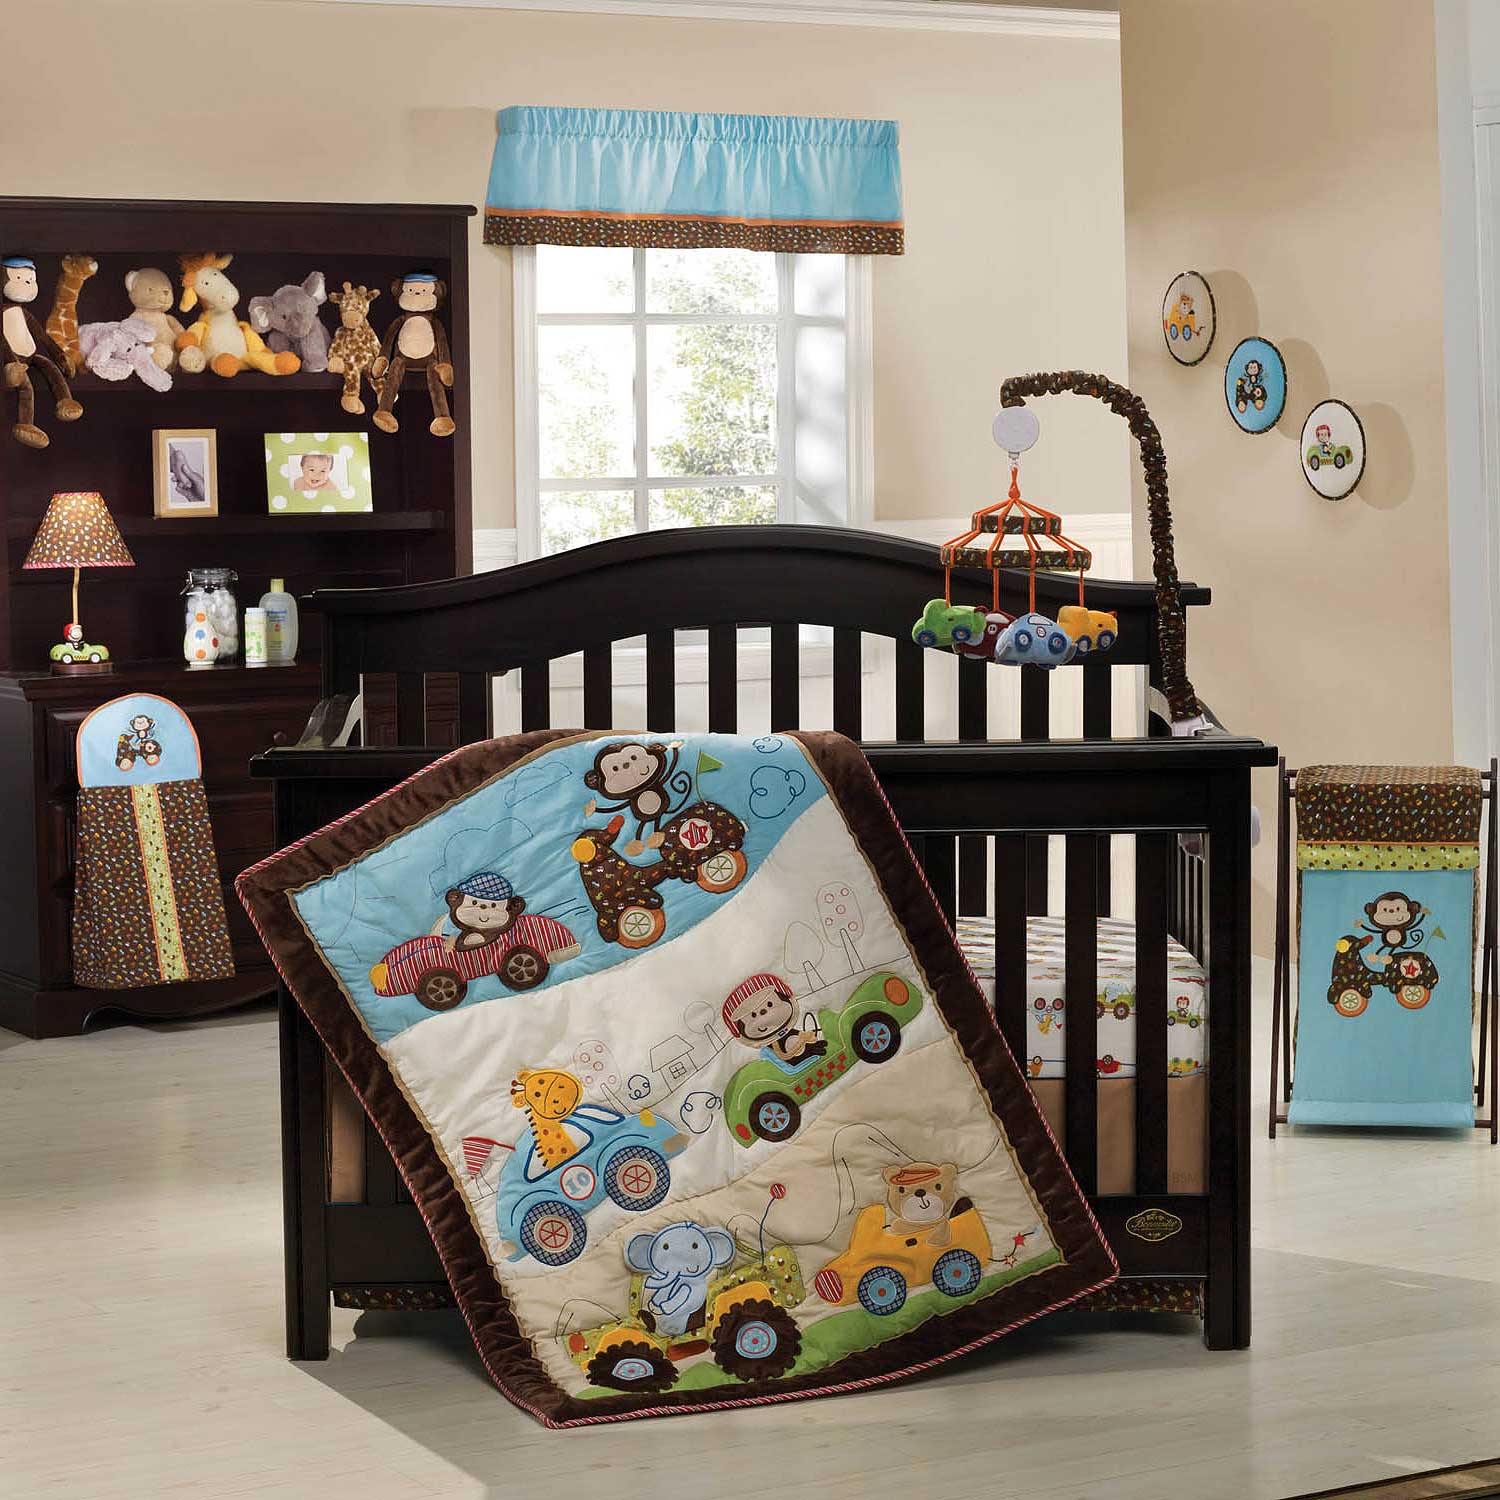 Monkey Themed Crib Funny Monkey Themed Baby Boy Crib Bedding Beautified With Hanging Accessory Above The Mattress In Colorful Splash Kids Room Enchanting Baby Boy Crib Bedding Applied In Colorful Baby Room